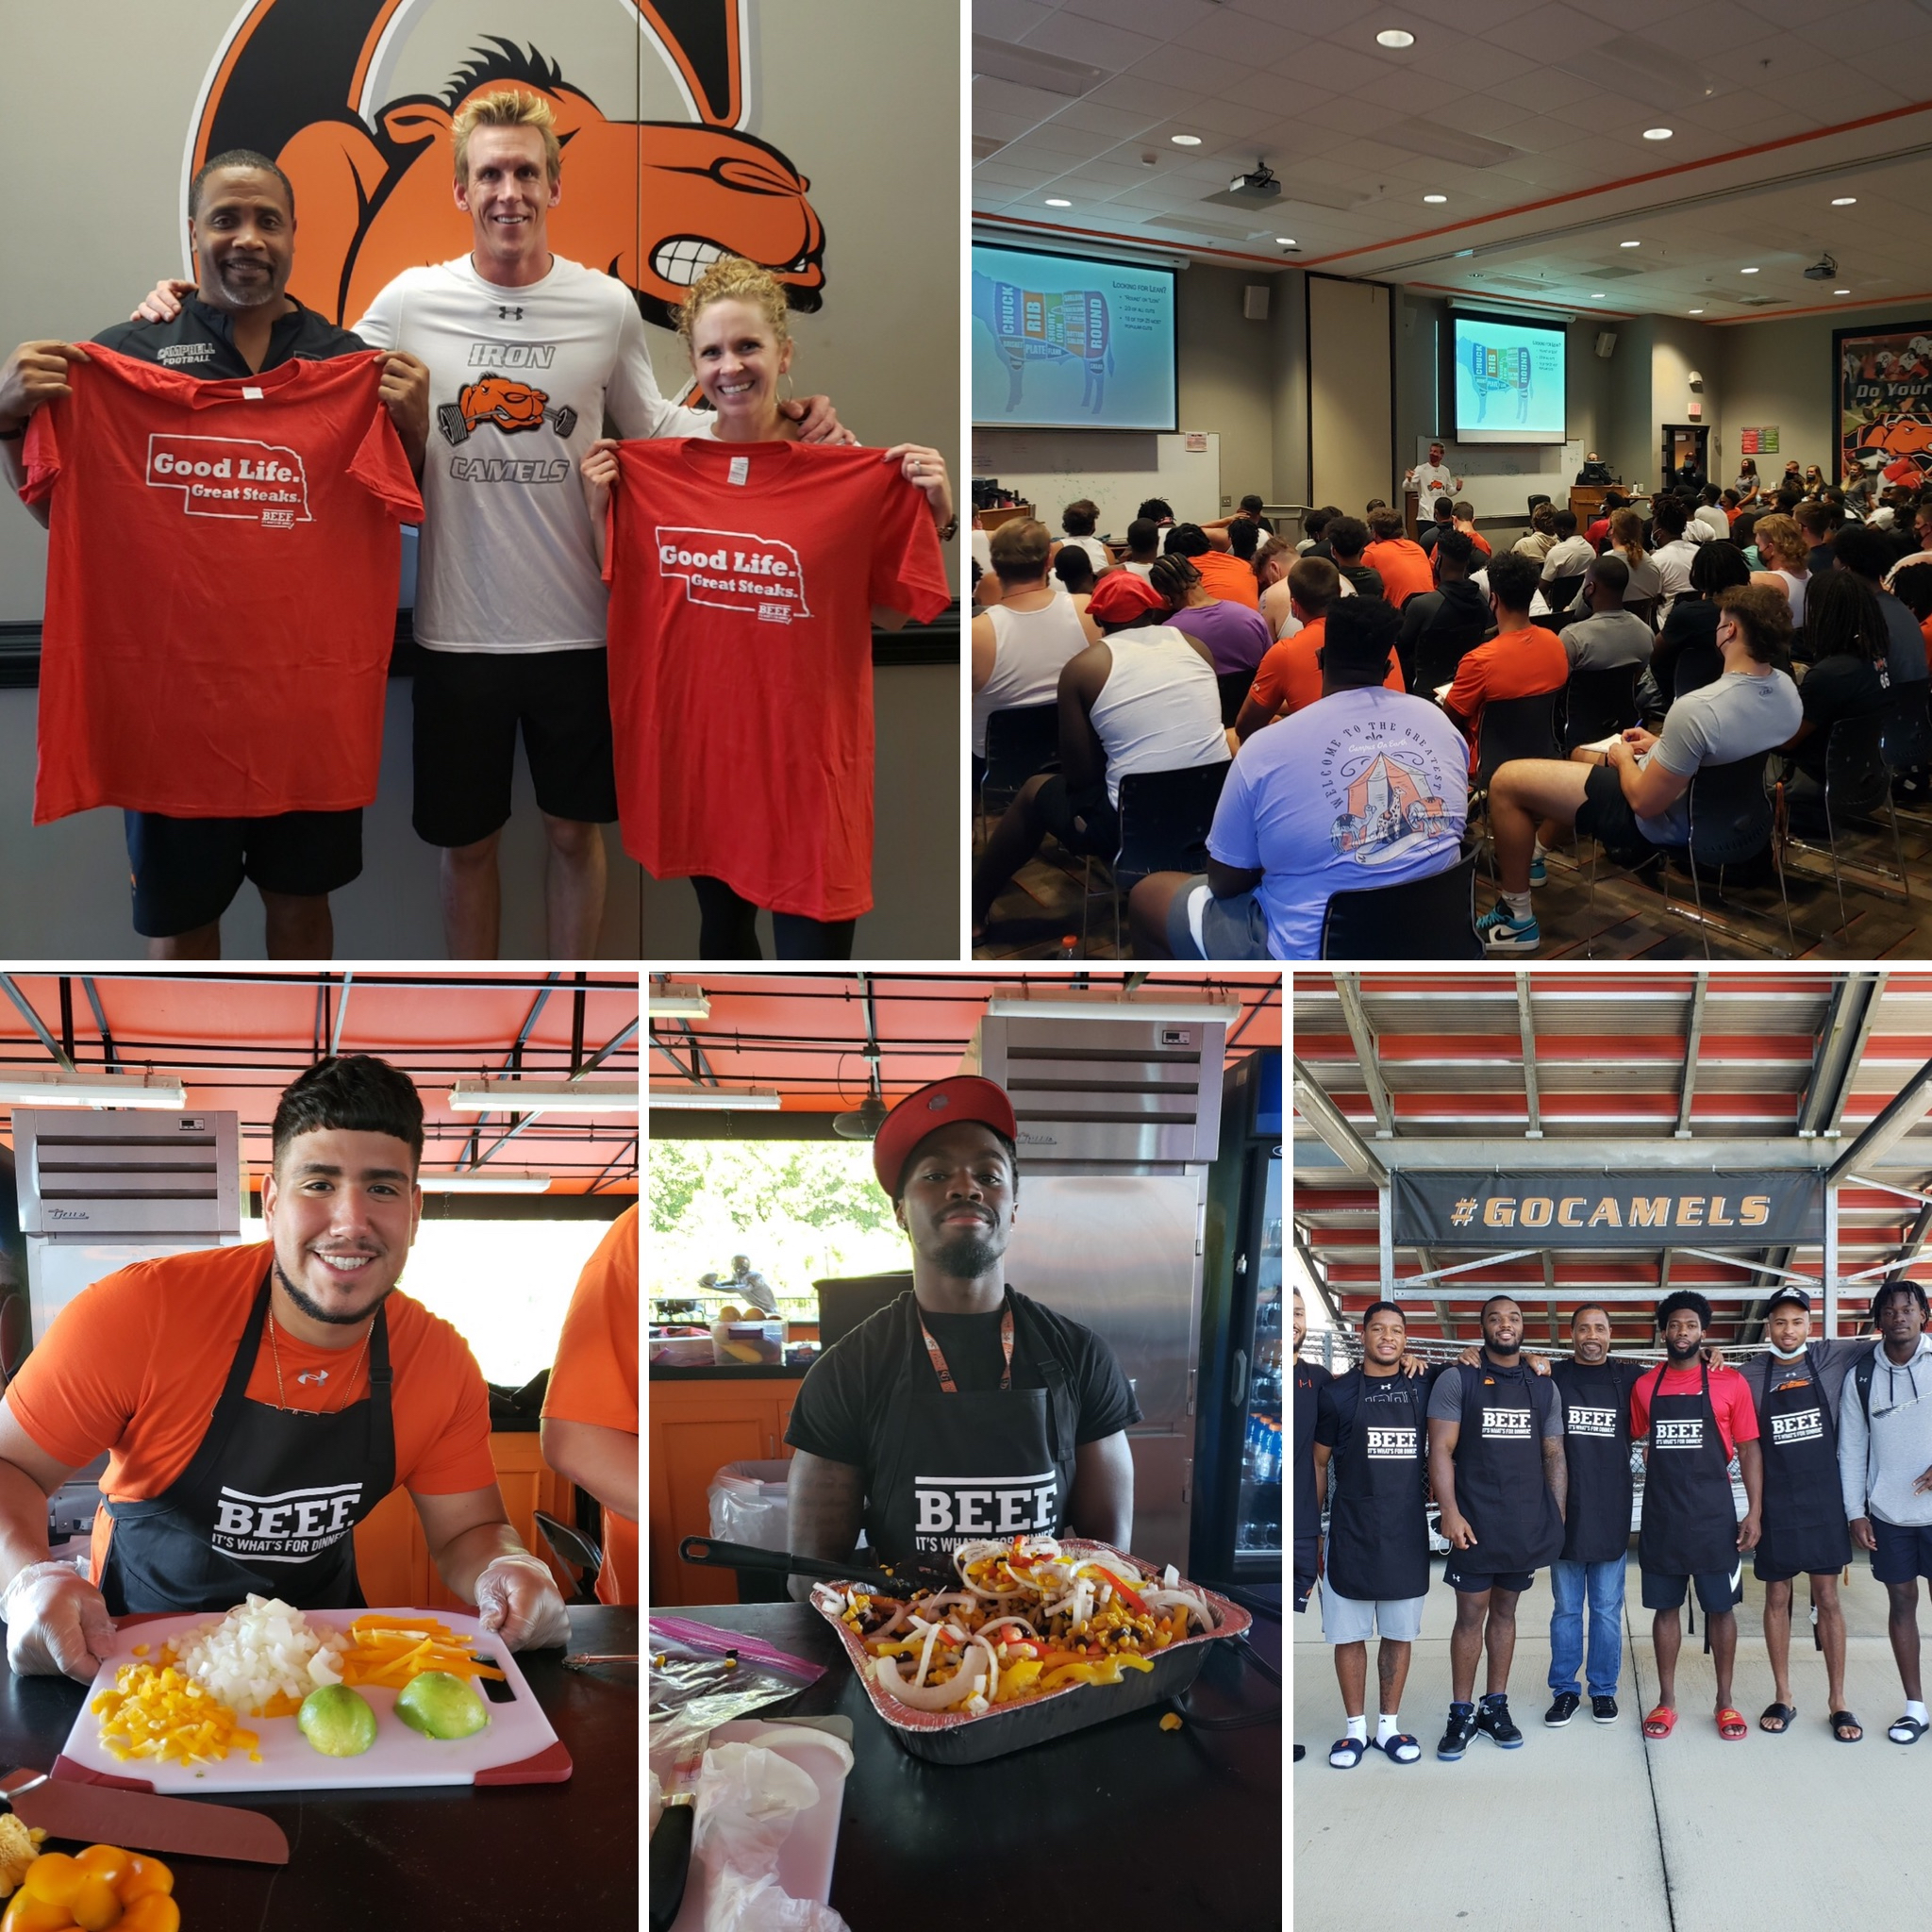  East Coast Football Team Looks to "The Good Life" for Great Nutrition